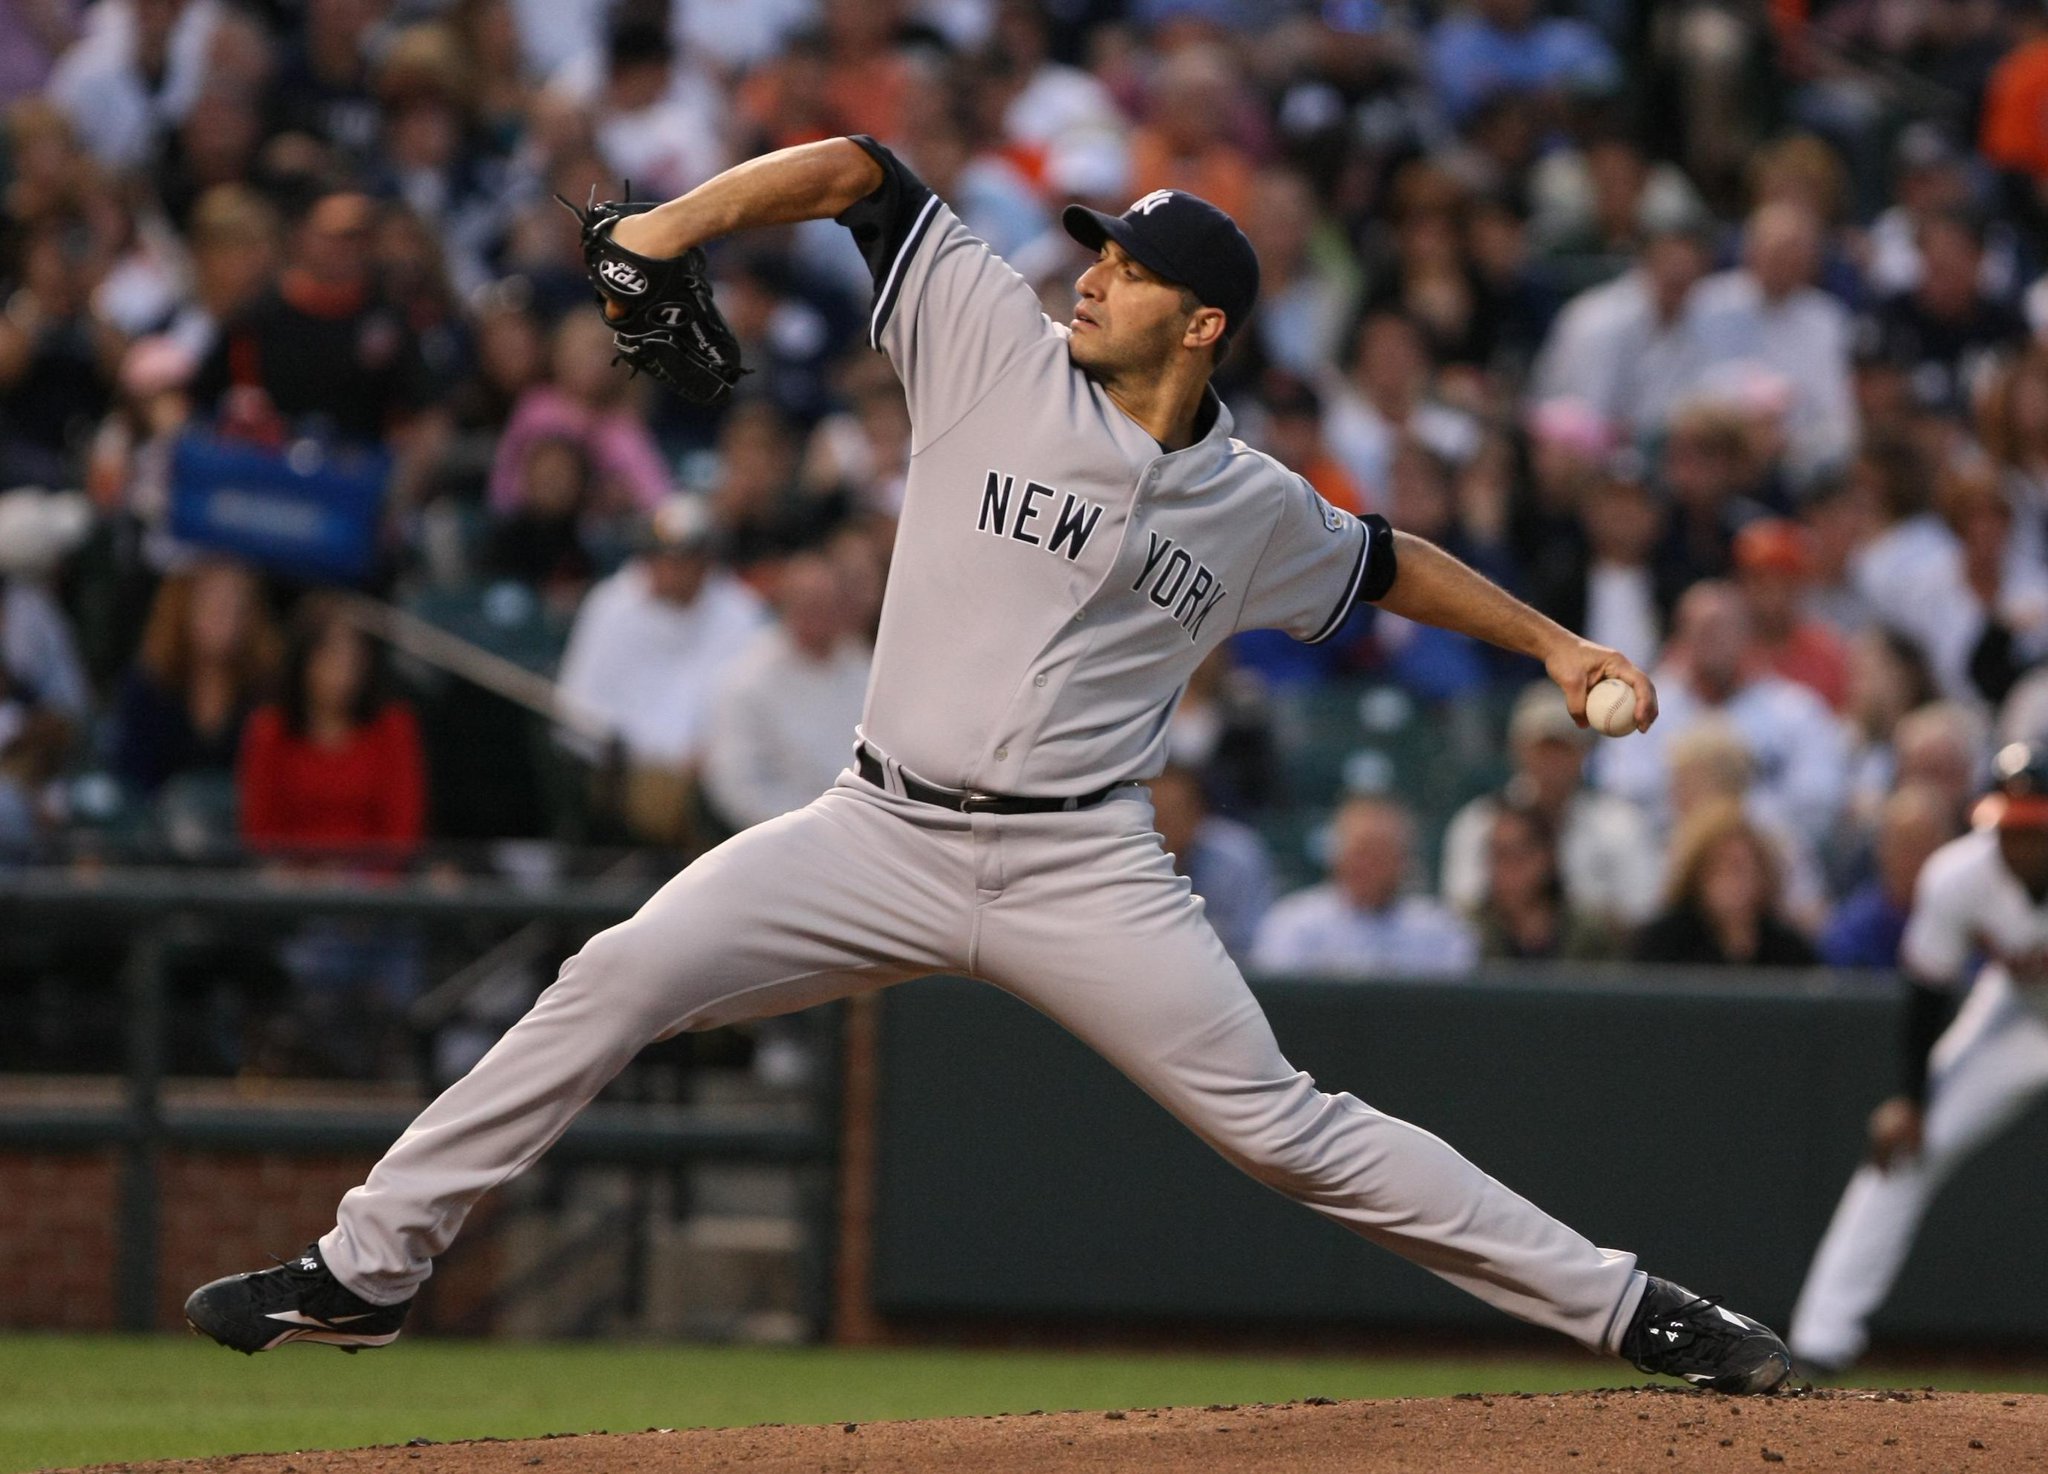 Happy Birthday to Andy Pettitte, who turns 43 today! 